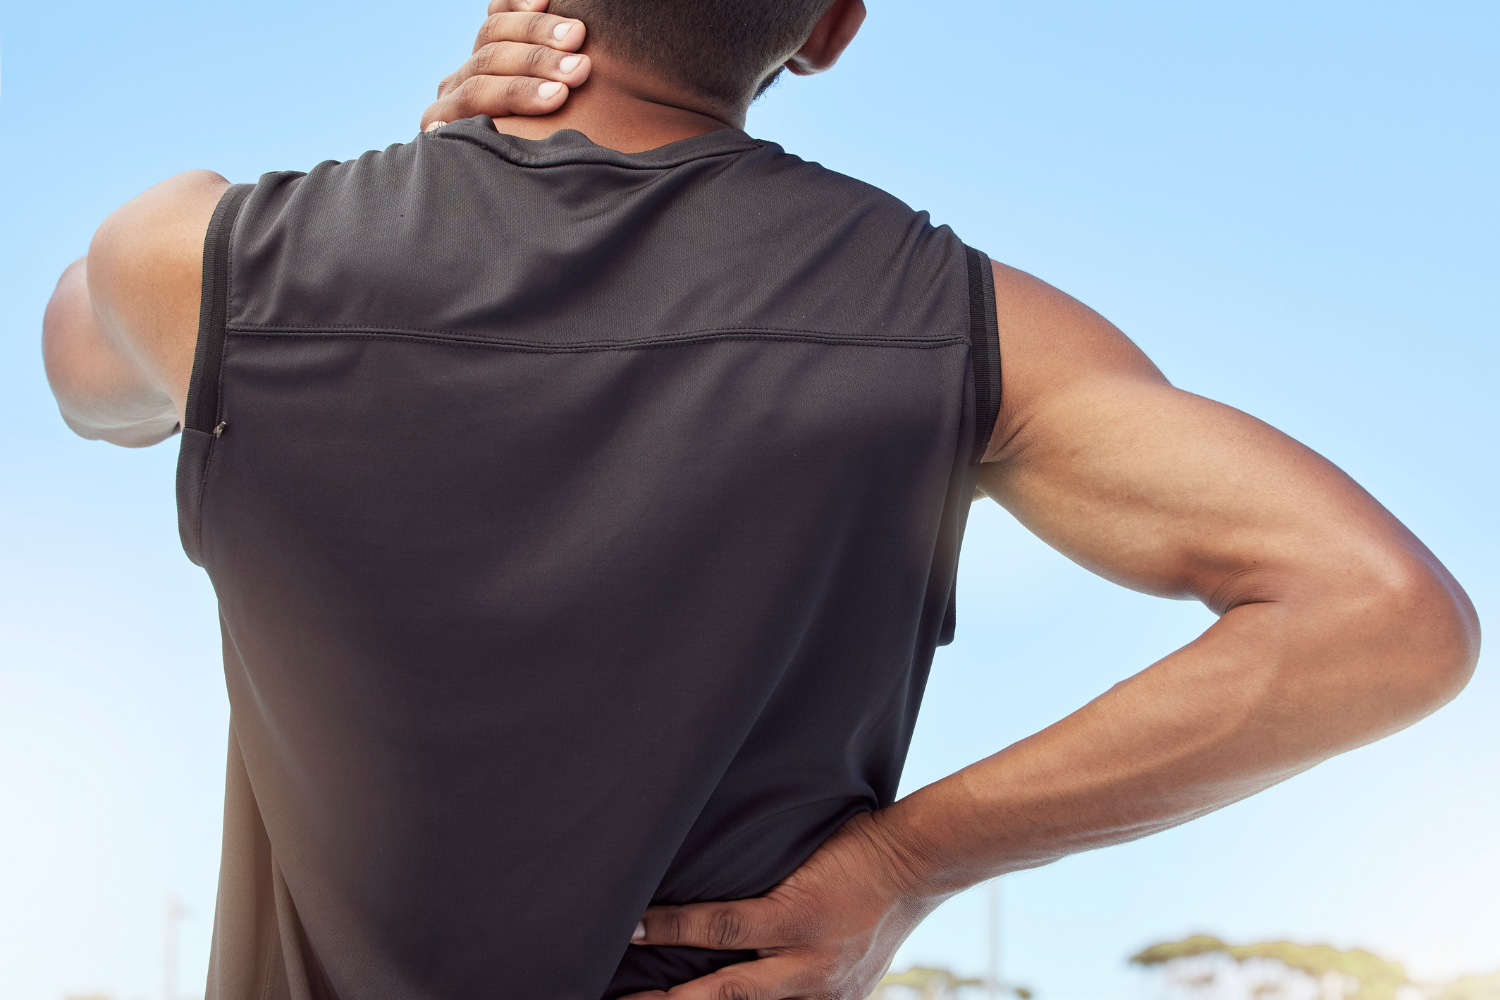 Here's How to Improve Muscle Soreness Post Workout